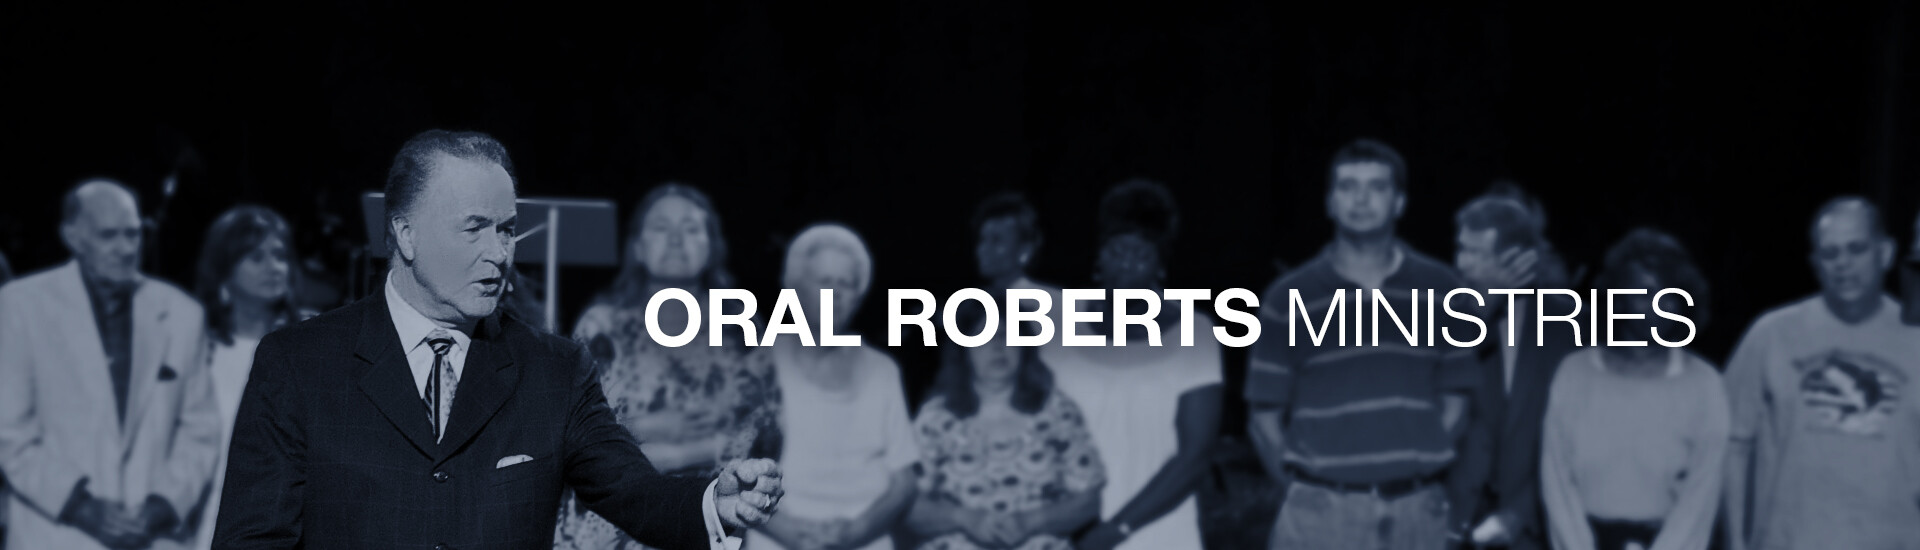 Oral Roberts Ministries